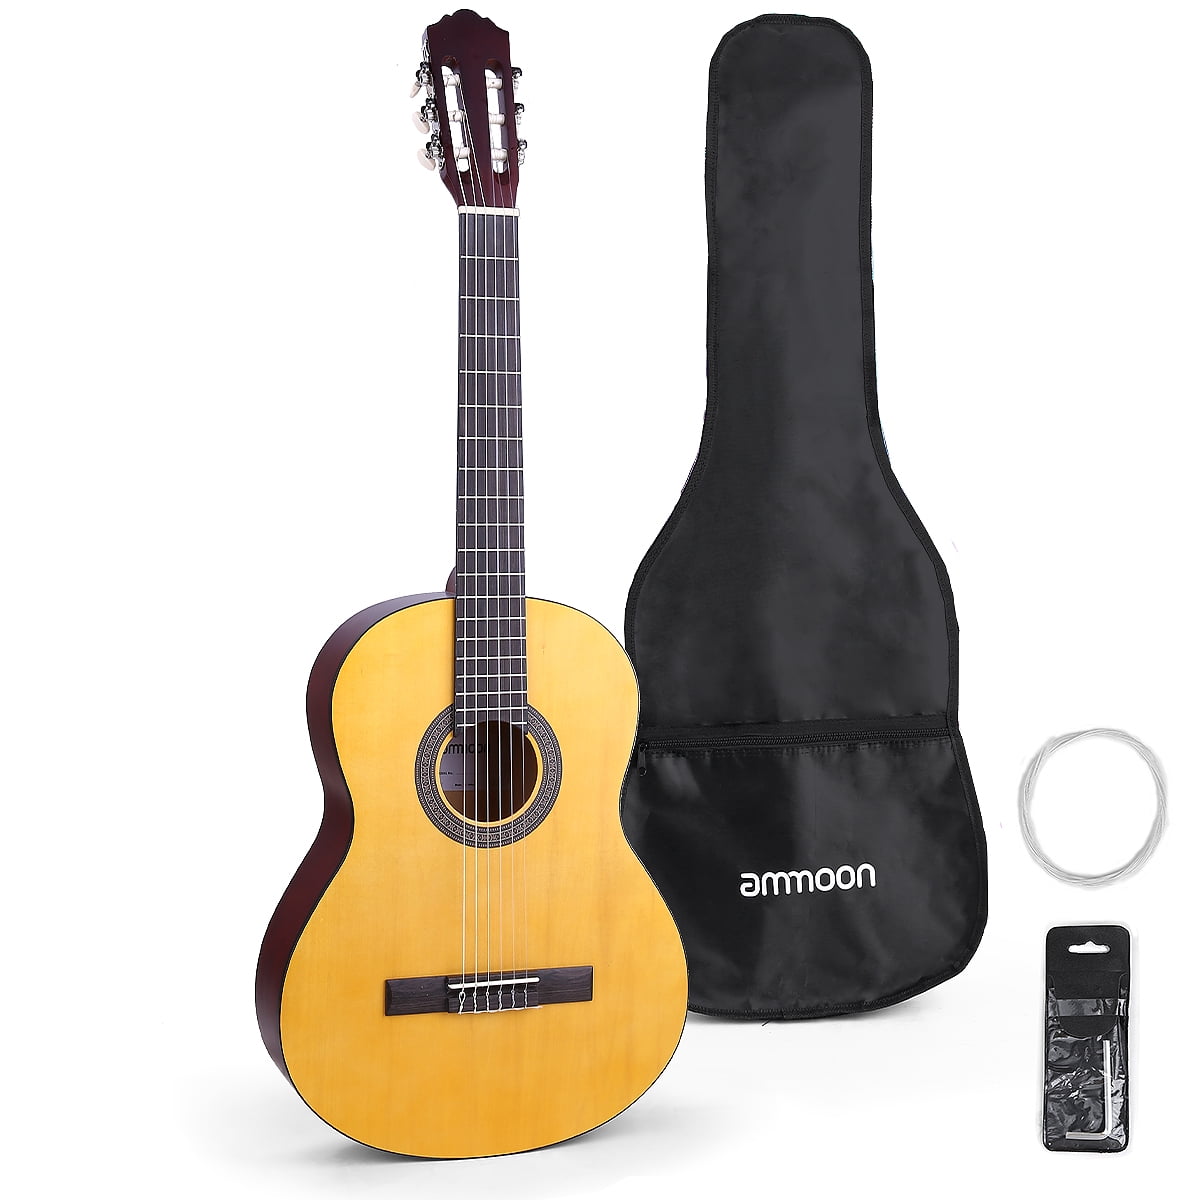 Sunset HUAWIND Dreadnought Small Acoustic Kids Guitar for Beginner 30 1/2 Half-Size Steel Strings Wooden Guitar with Gig Bag